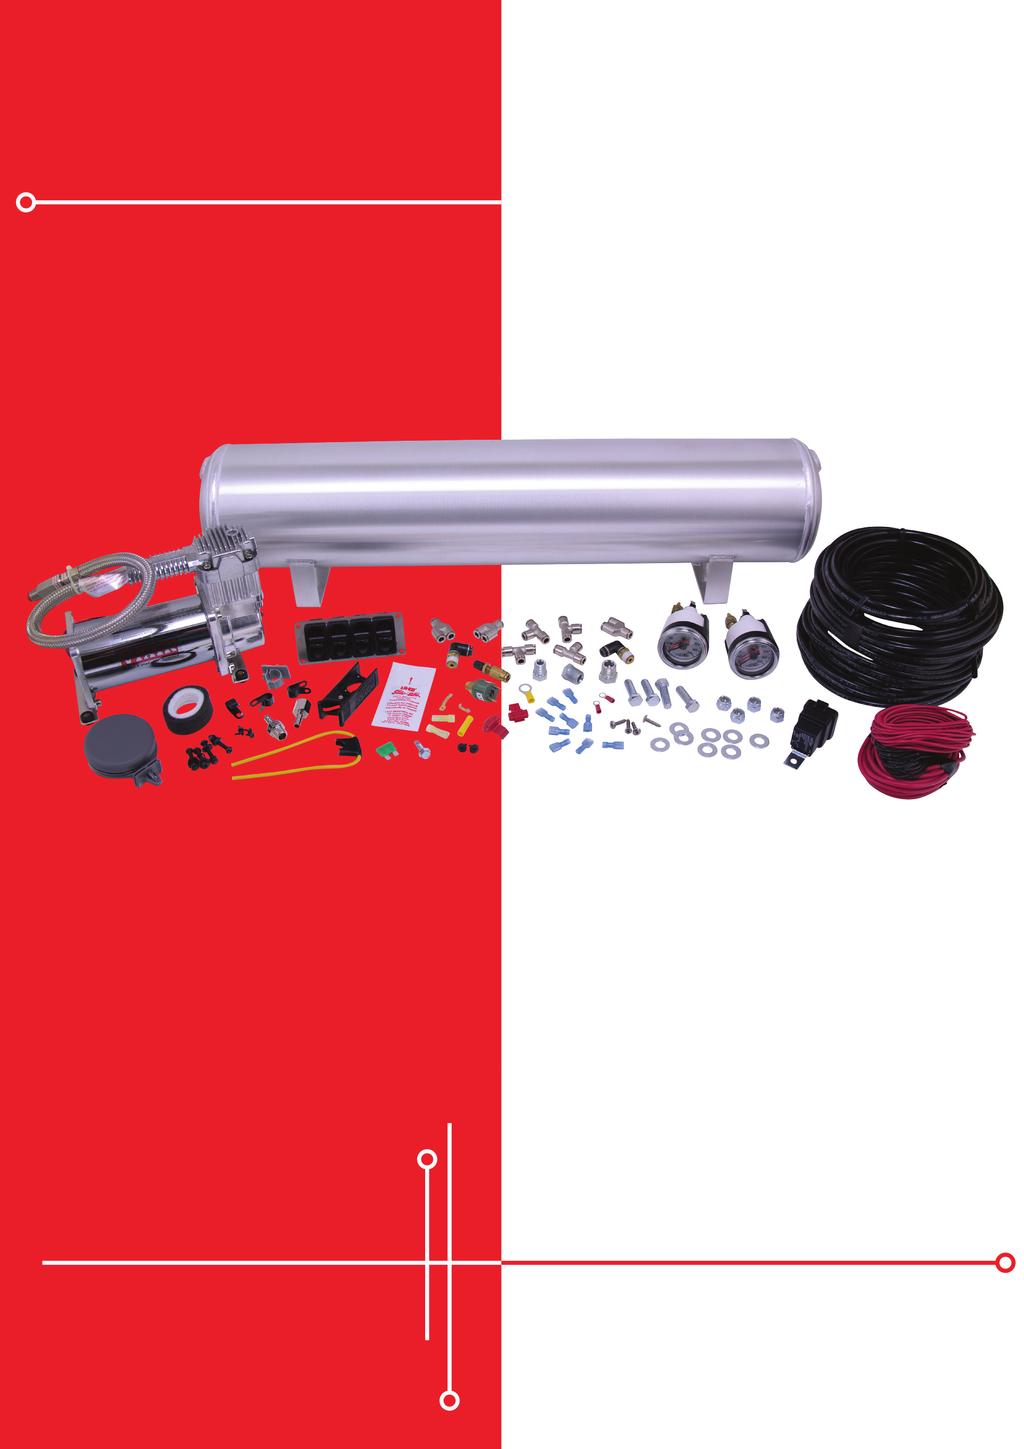 MN-726 (041404) ECR 7825 Air Lift PERFORMANCE Kit 27666 Manual Air Management System INSTALLATION GUIDE For maximum effectiveness and safety,